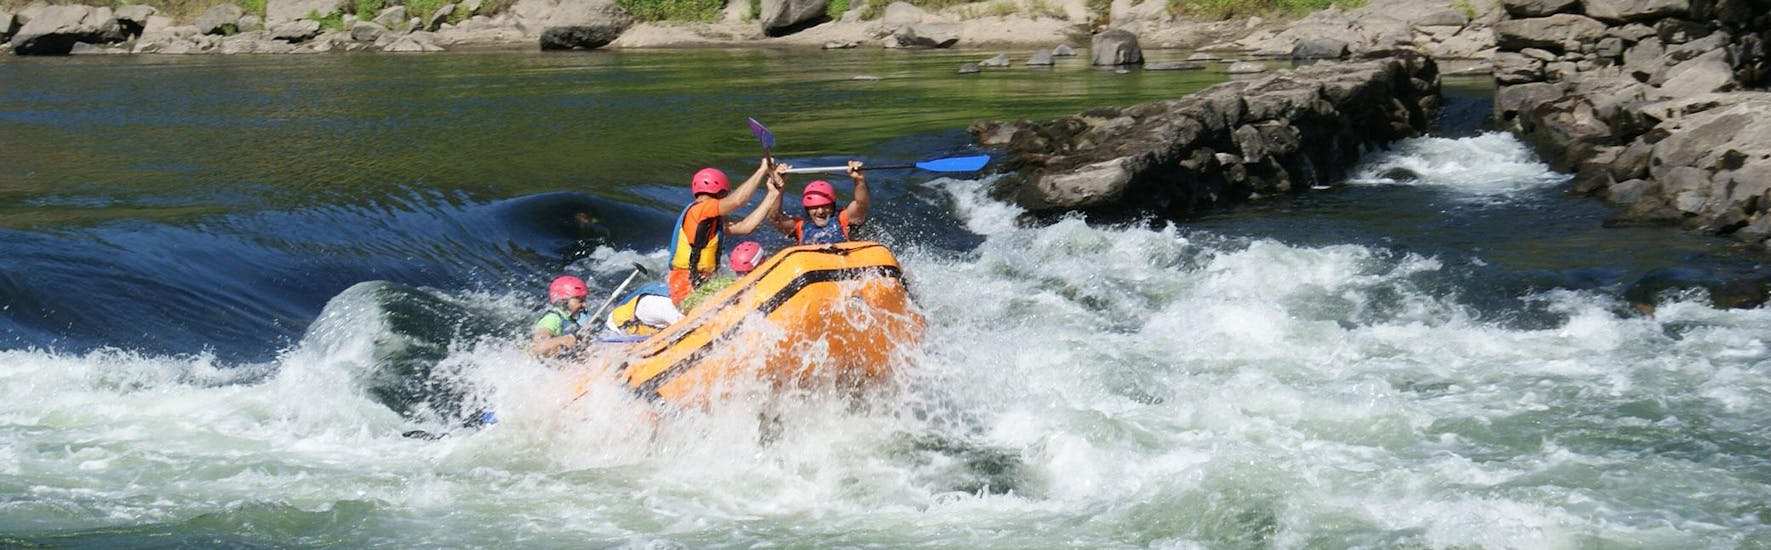 A group of people is attemting to keep the dinghy steady while rafting on the Minho River with Melgaço White Water.